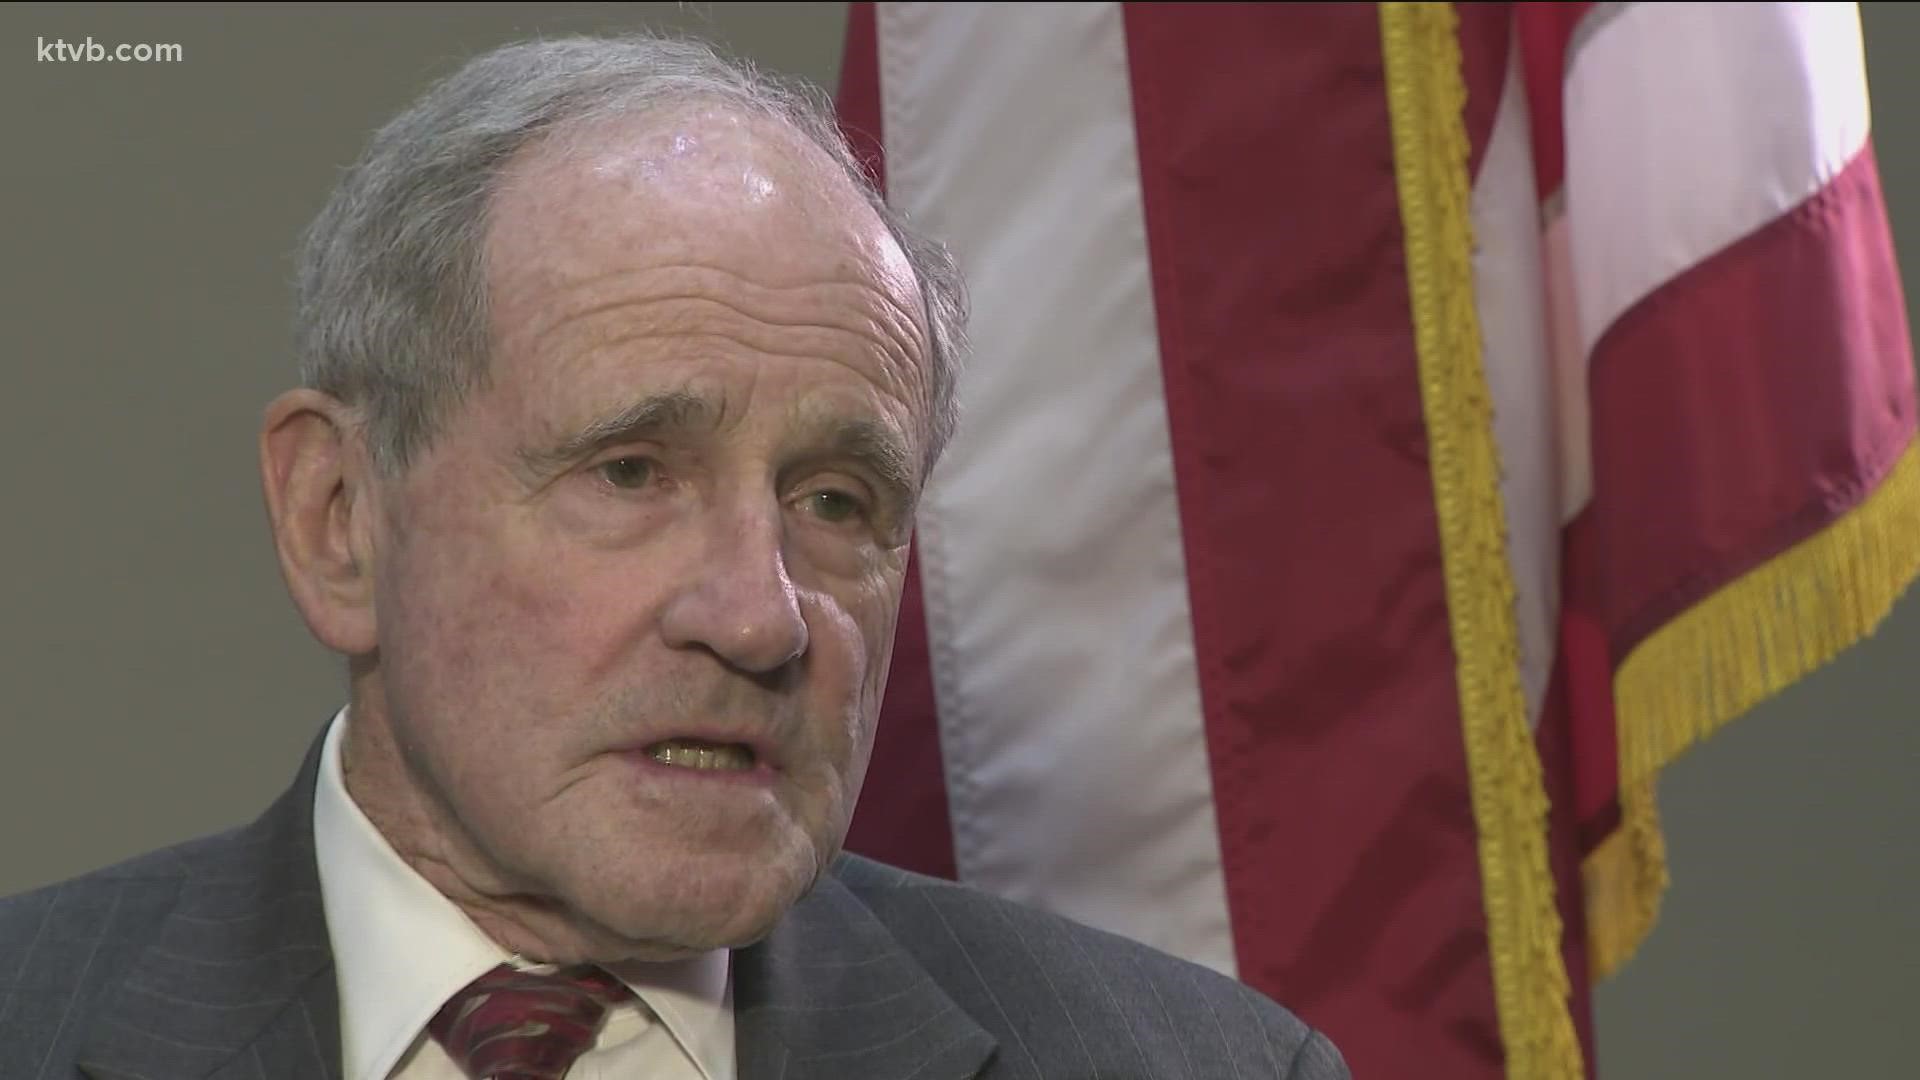 U.S. Senator and Ranking Member of the Senate Foreign Relations Committee Jim Risch joins KTVB to discuss his bill, the NYET Act, and Russia's attack on Ukraine.